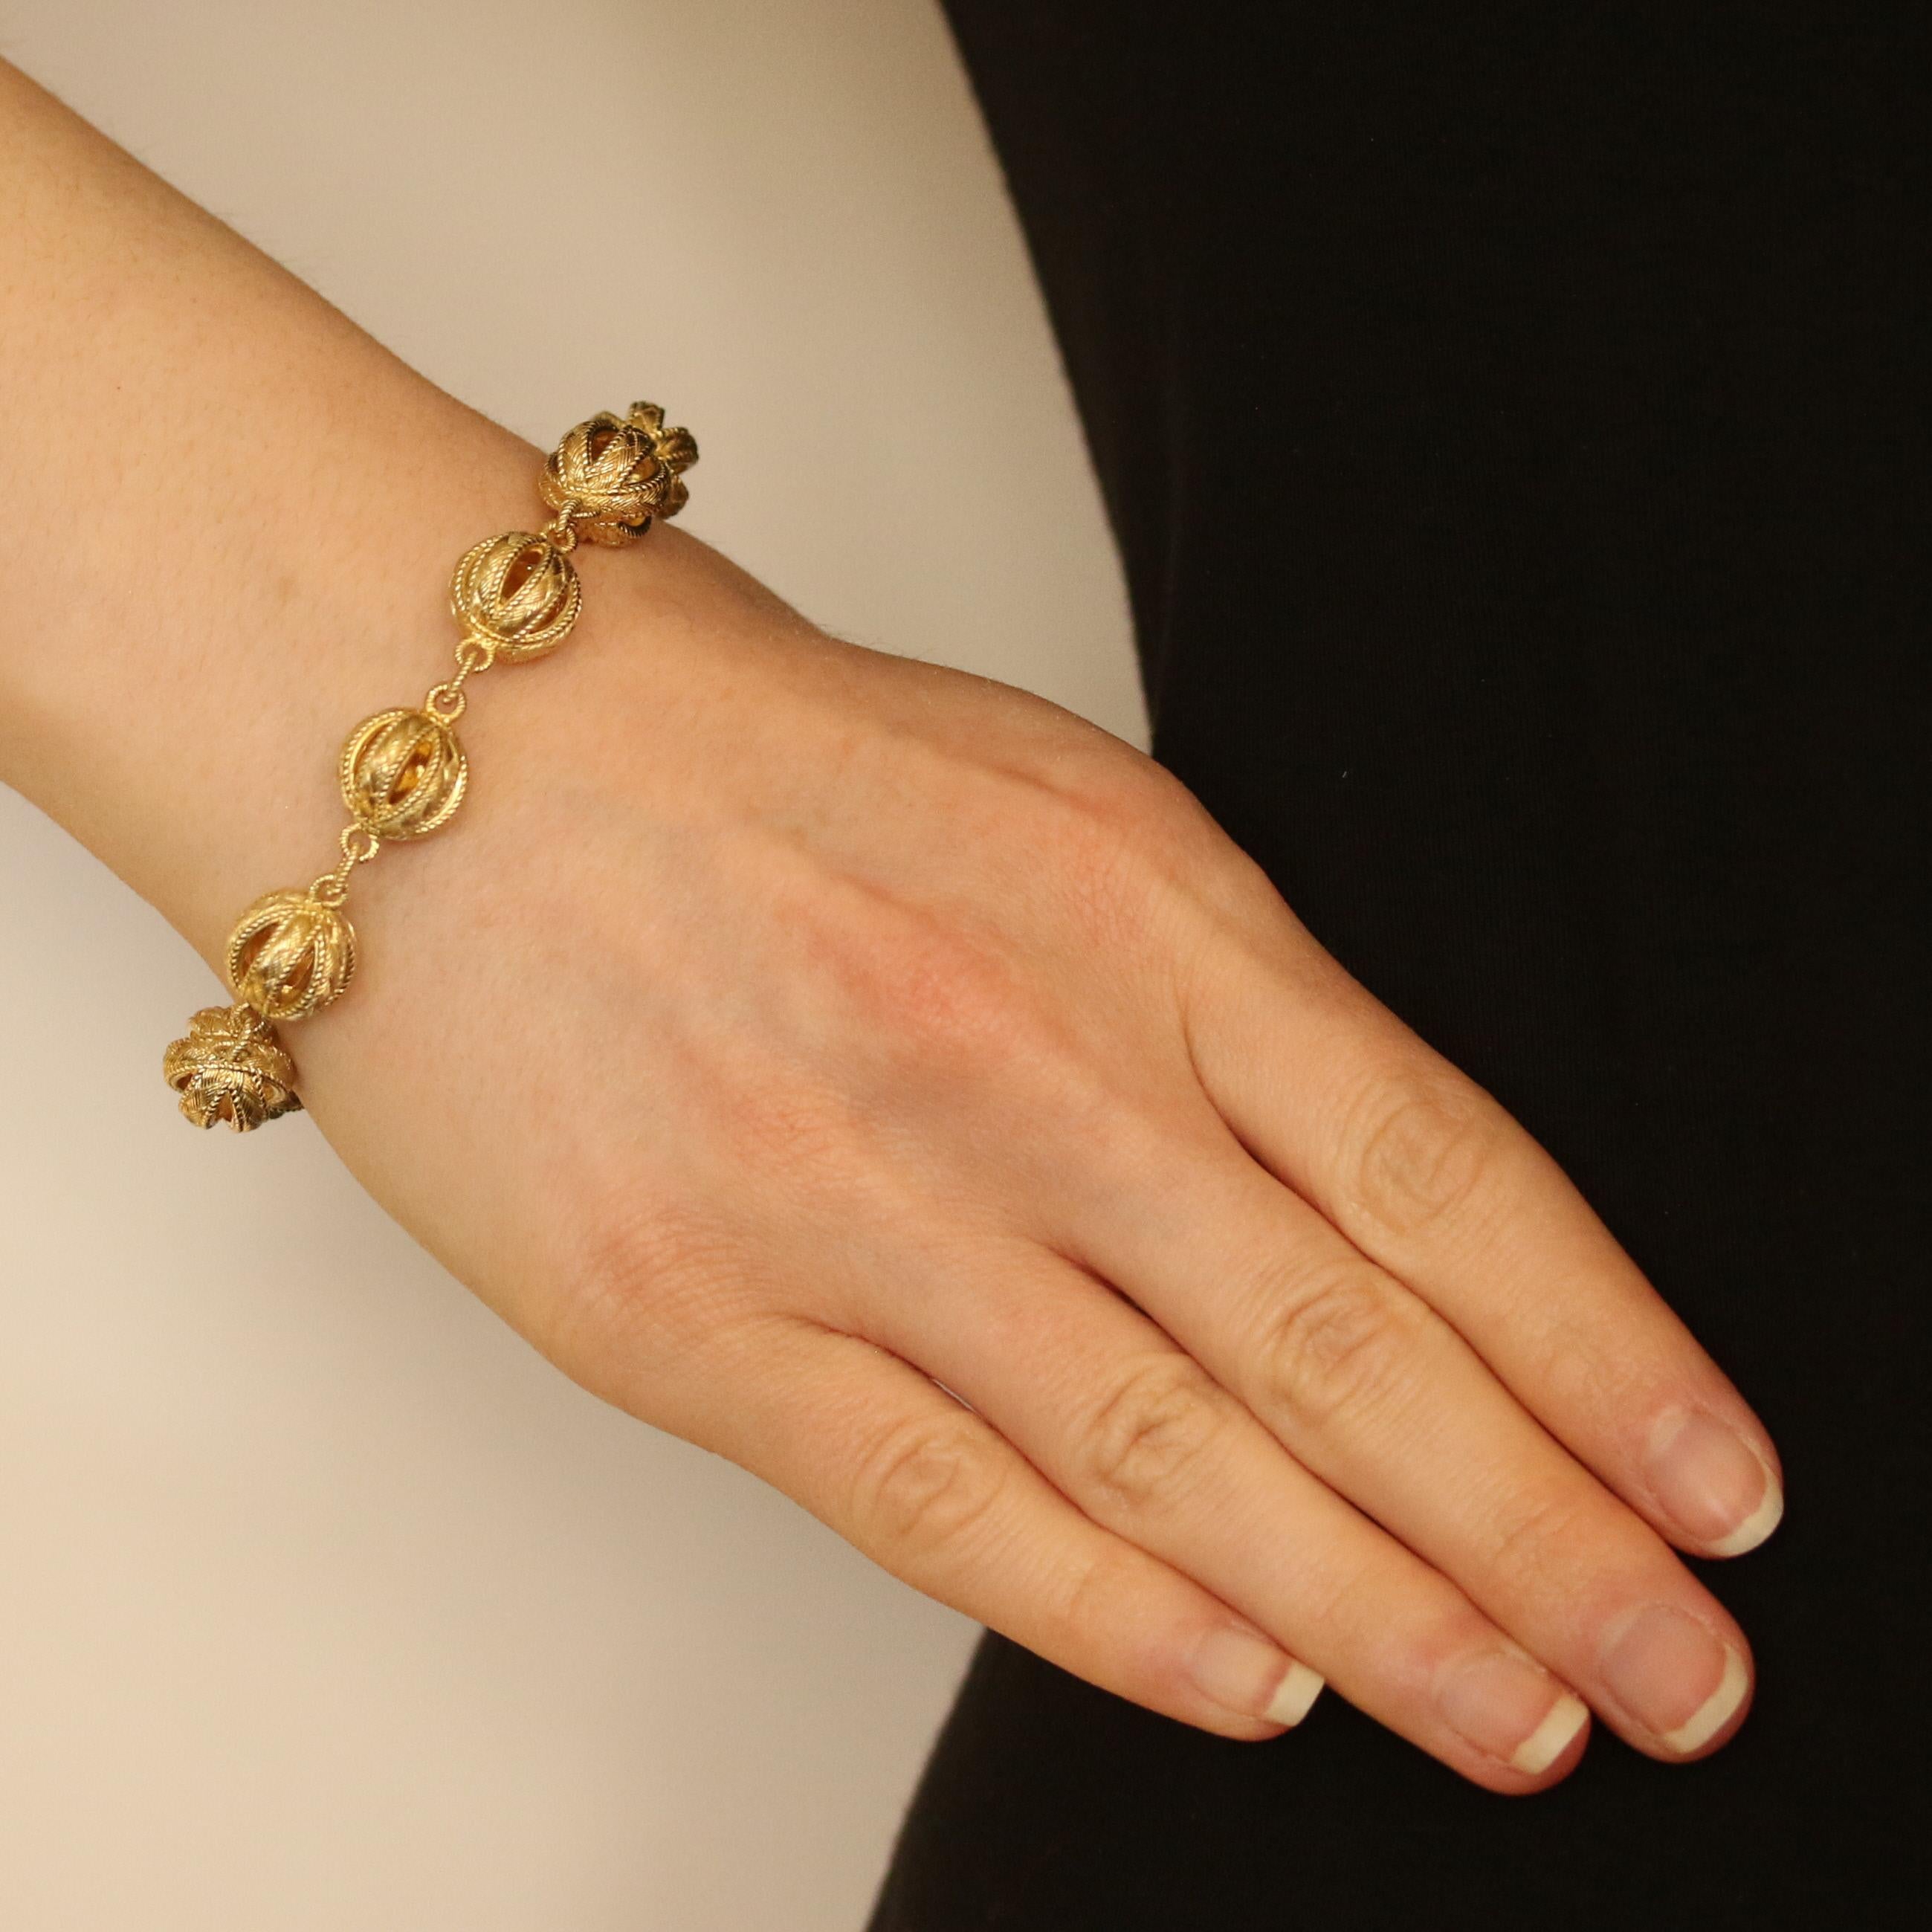 Surprise a special friend or family member with this gorgeous designer bracelet! Fashioned by Judith Ripka in gold-plated sterling silver, this eye-catching piece features nine large, open-cut beads. Ribbed designs and roped detailing give the